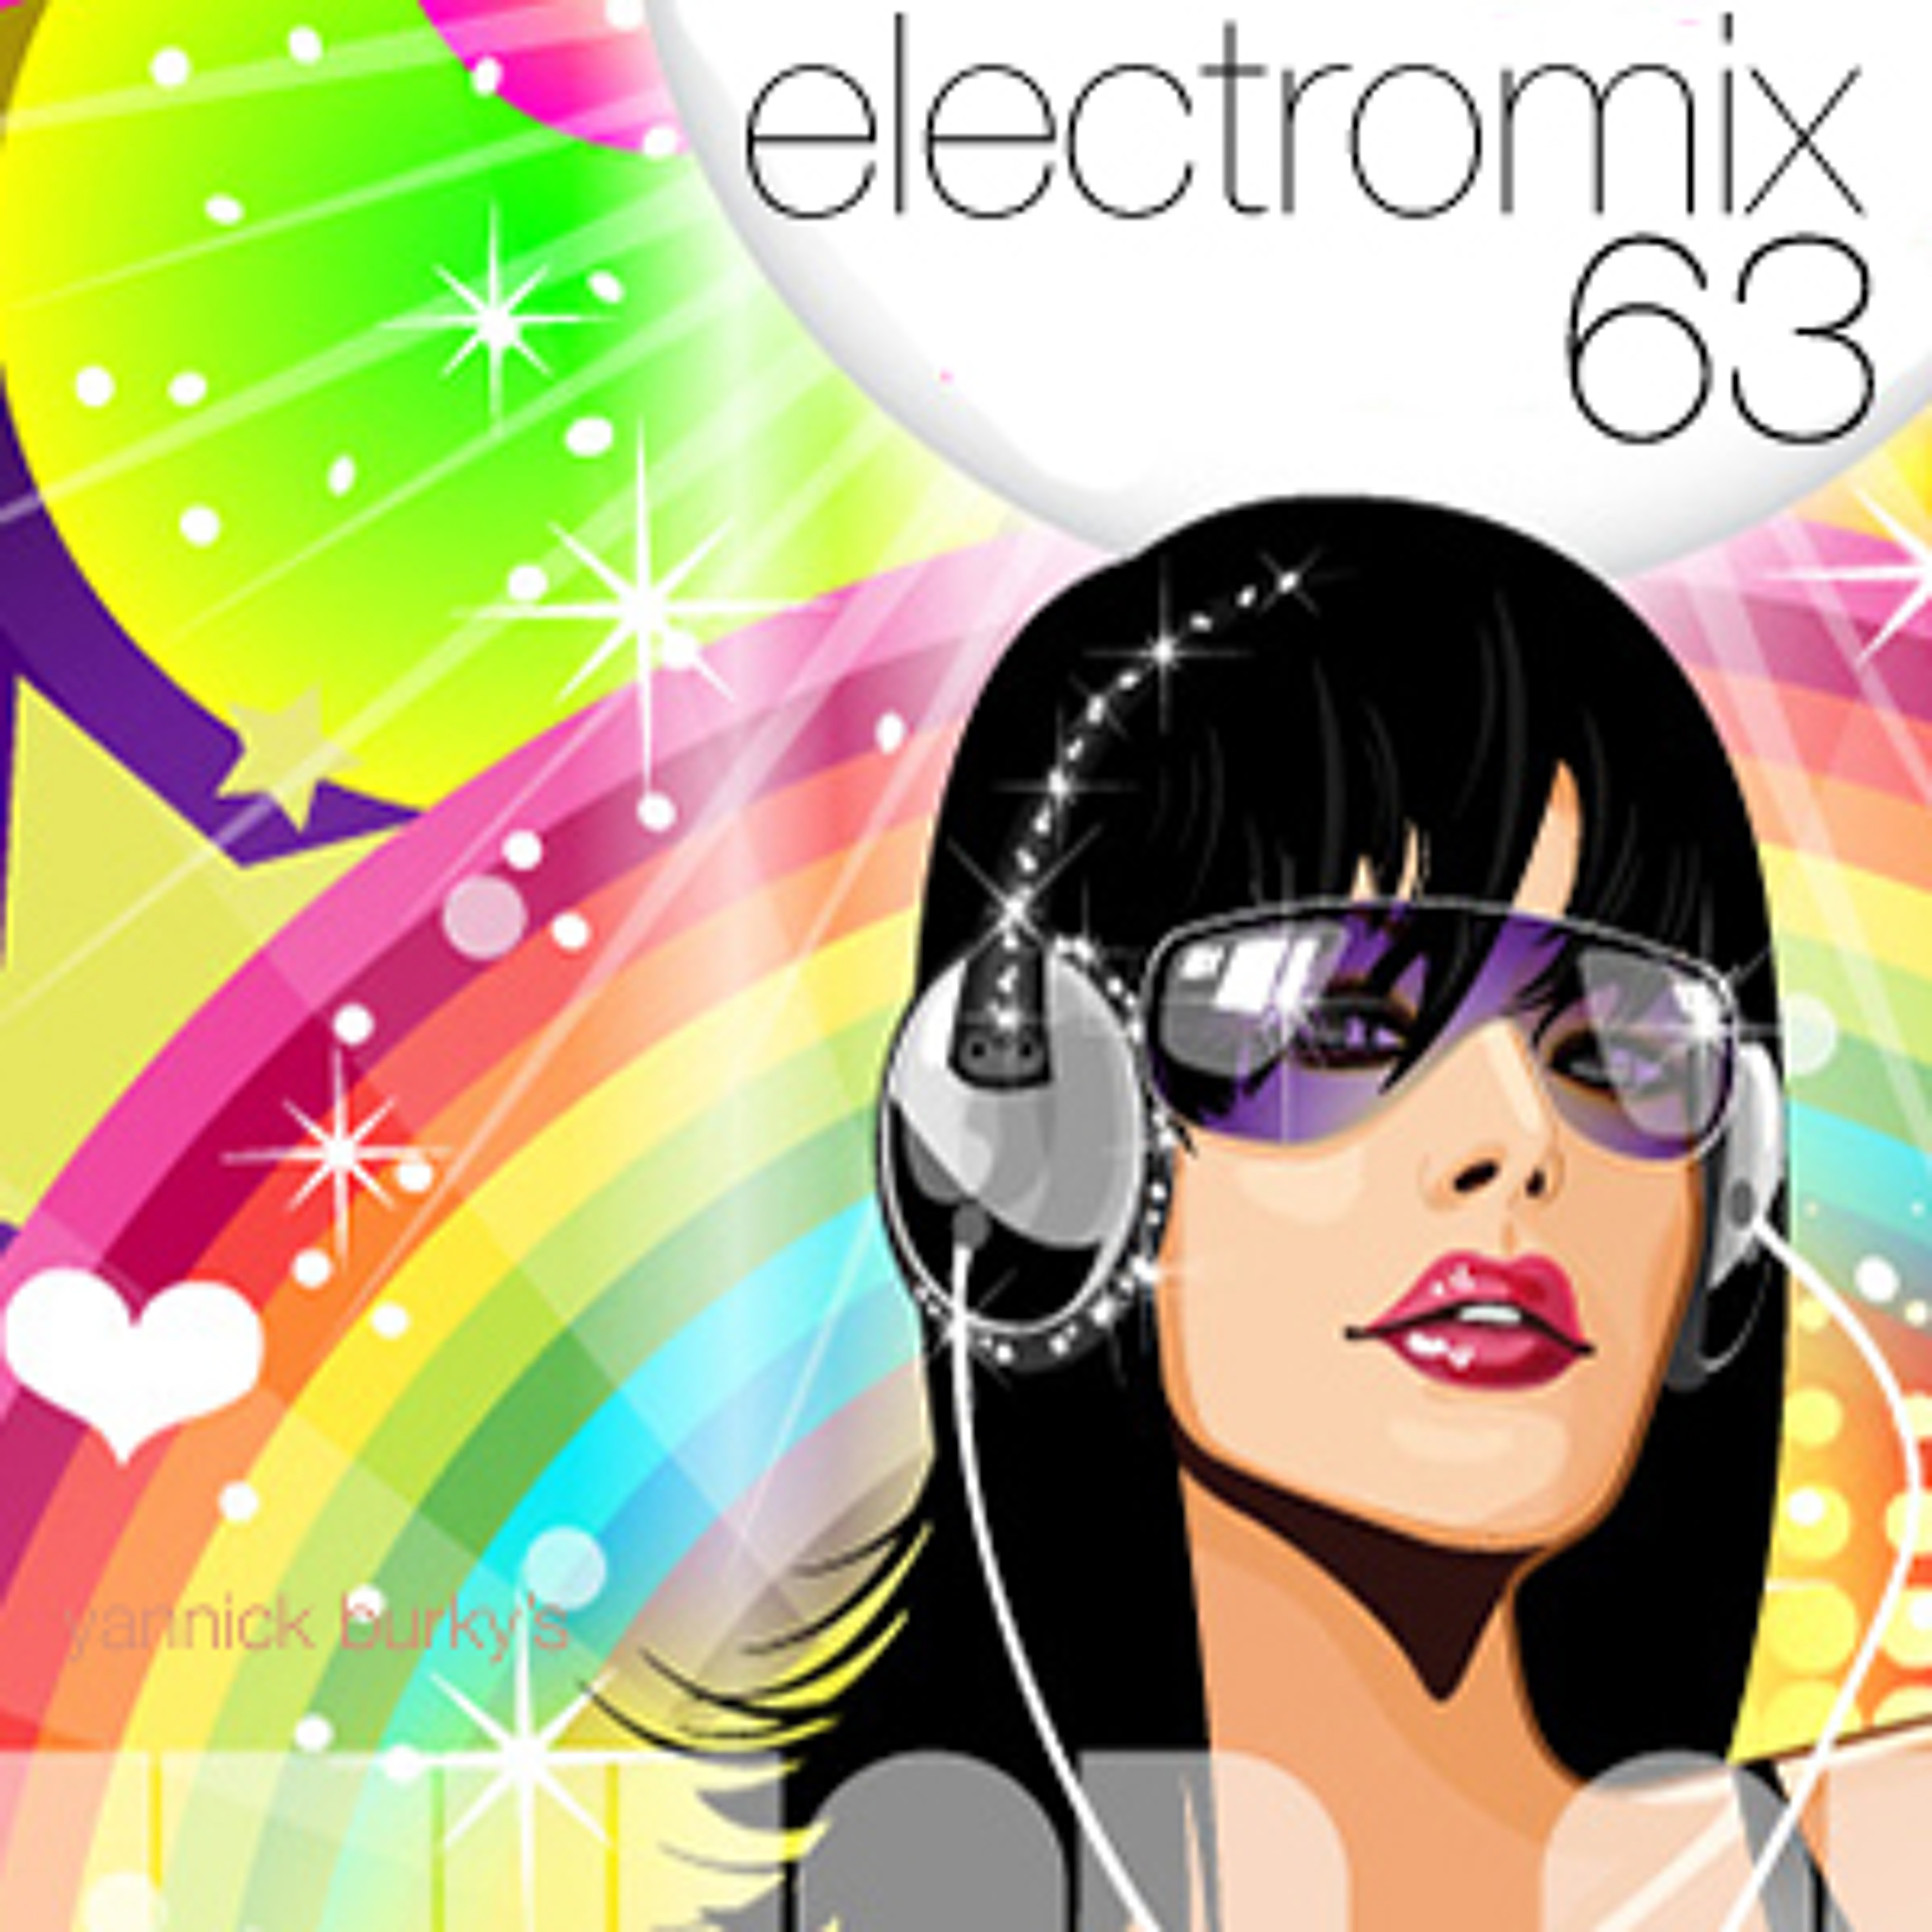 electromix 63 • House Music